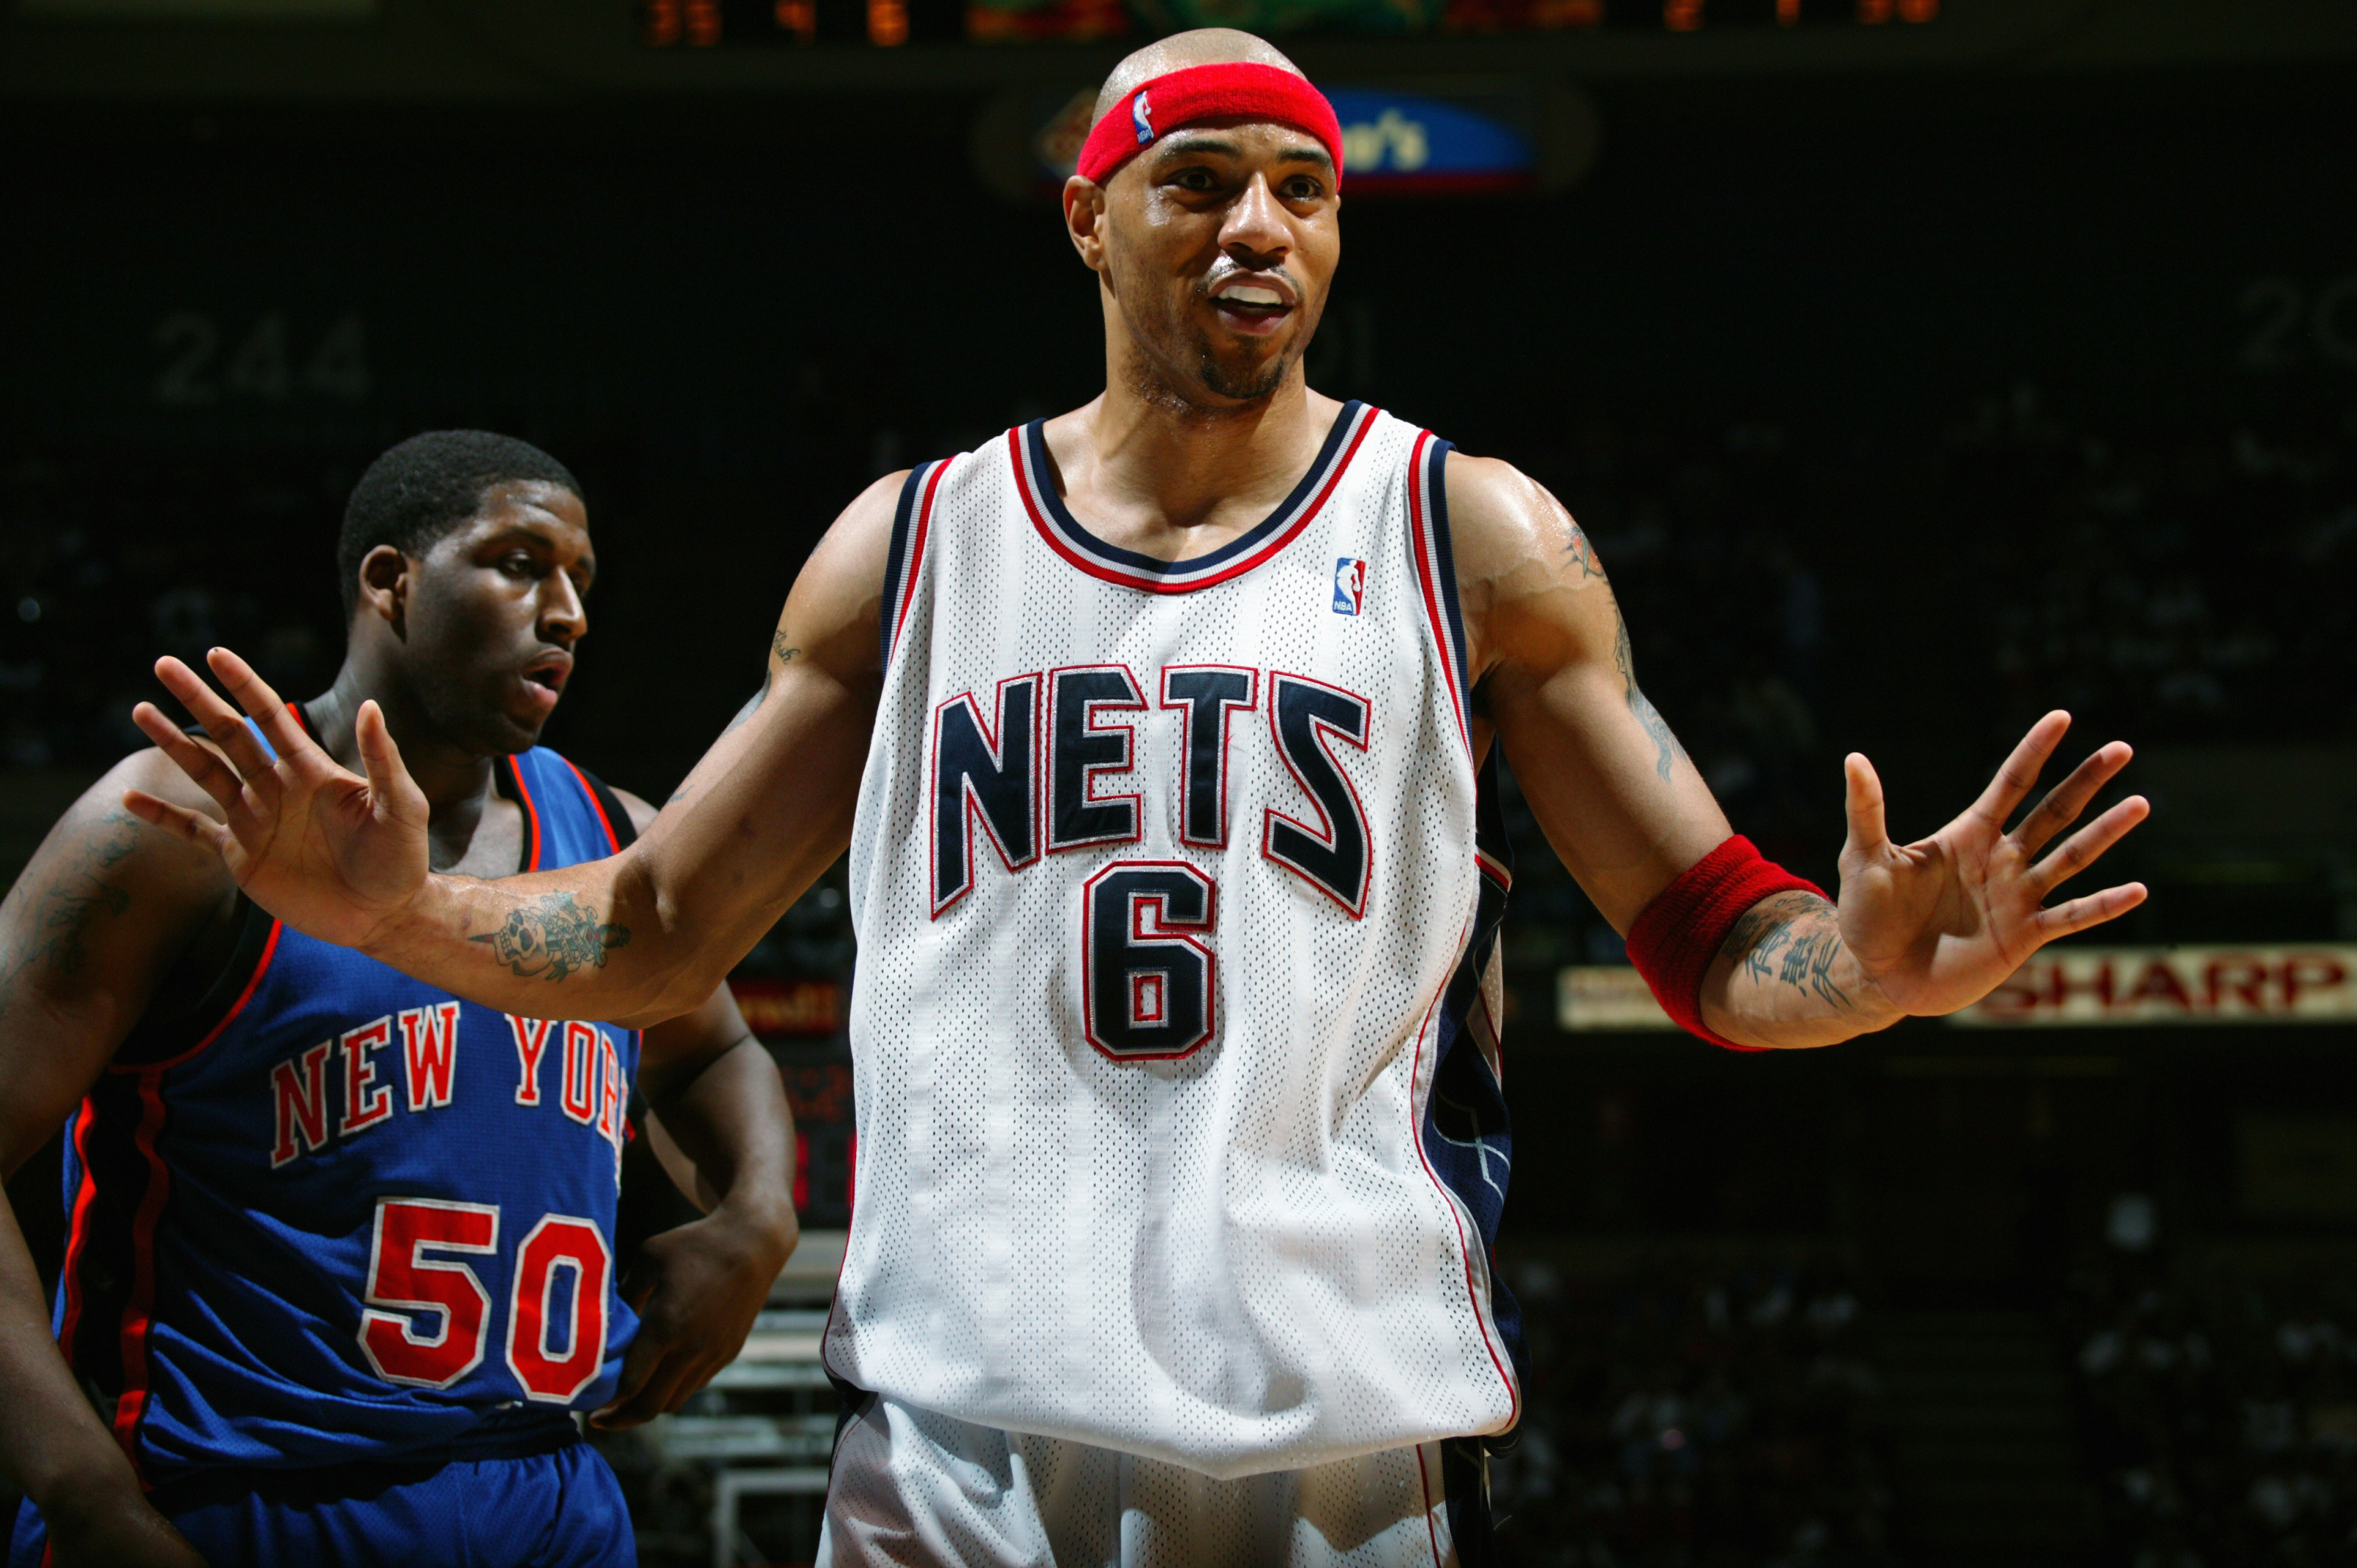 Vince Carter of the New Jersey Nets during the 2008 NBA Europe